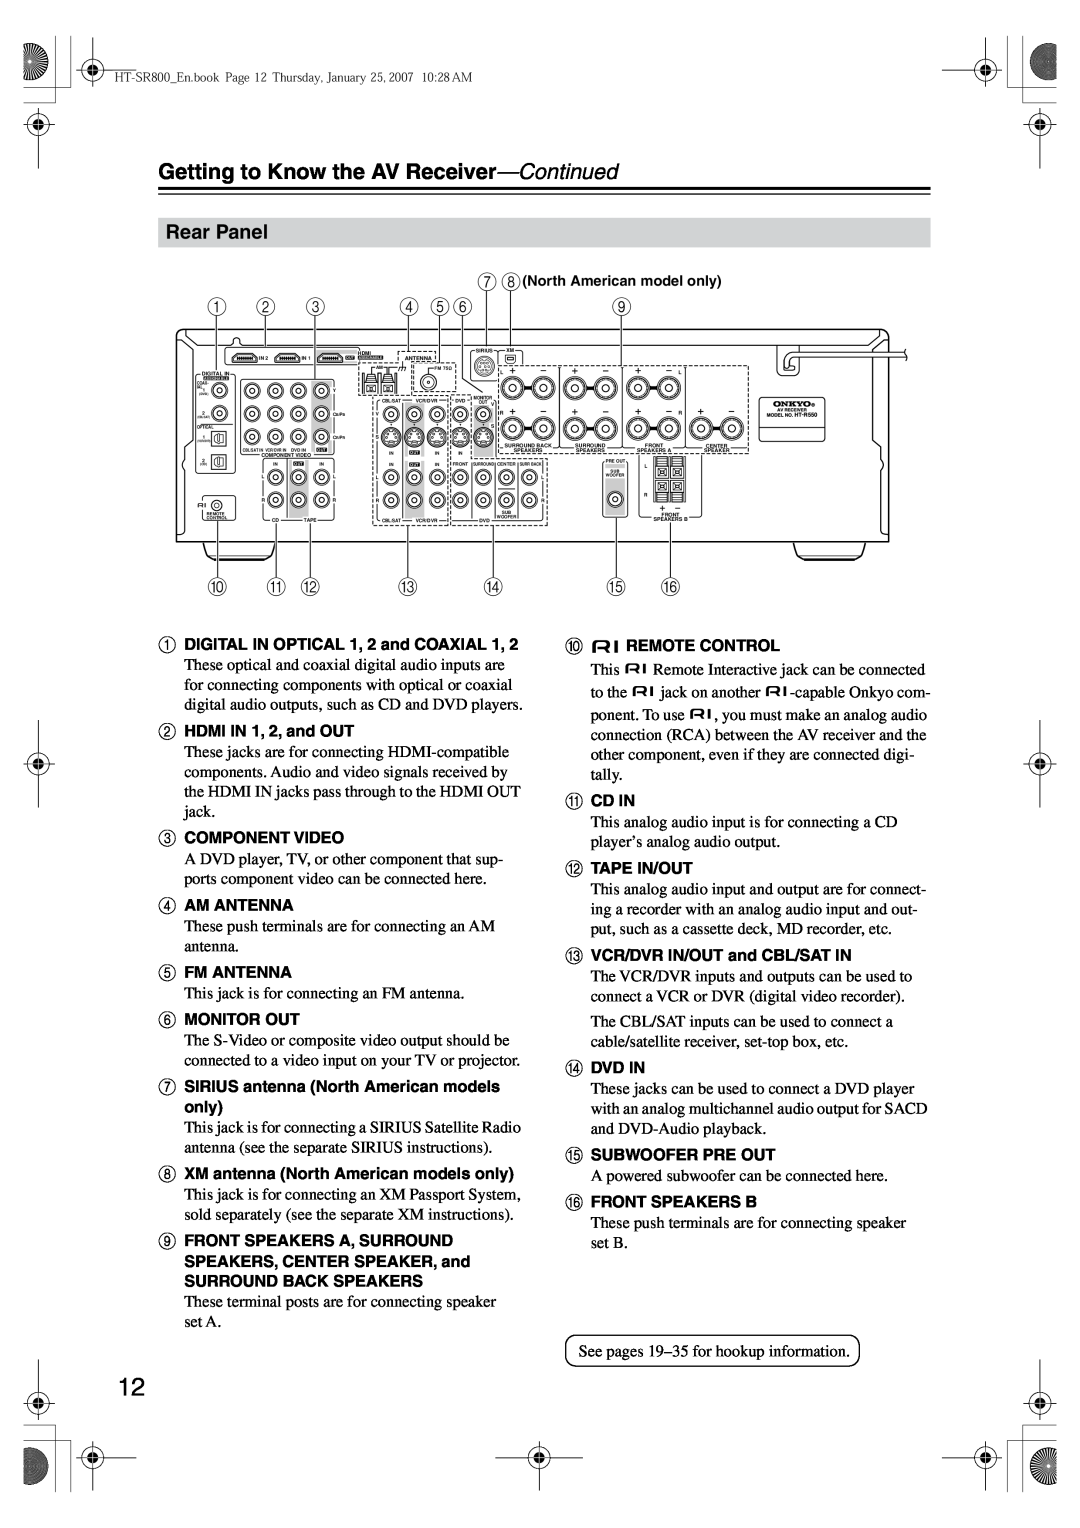 Onkyo HT-SR800 instruction manual J K L M N O P, Rear Panel, Getting to Know the AV Receiver-Continued 